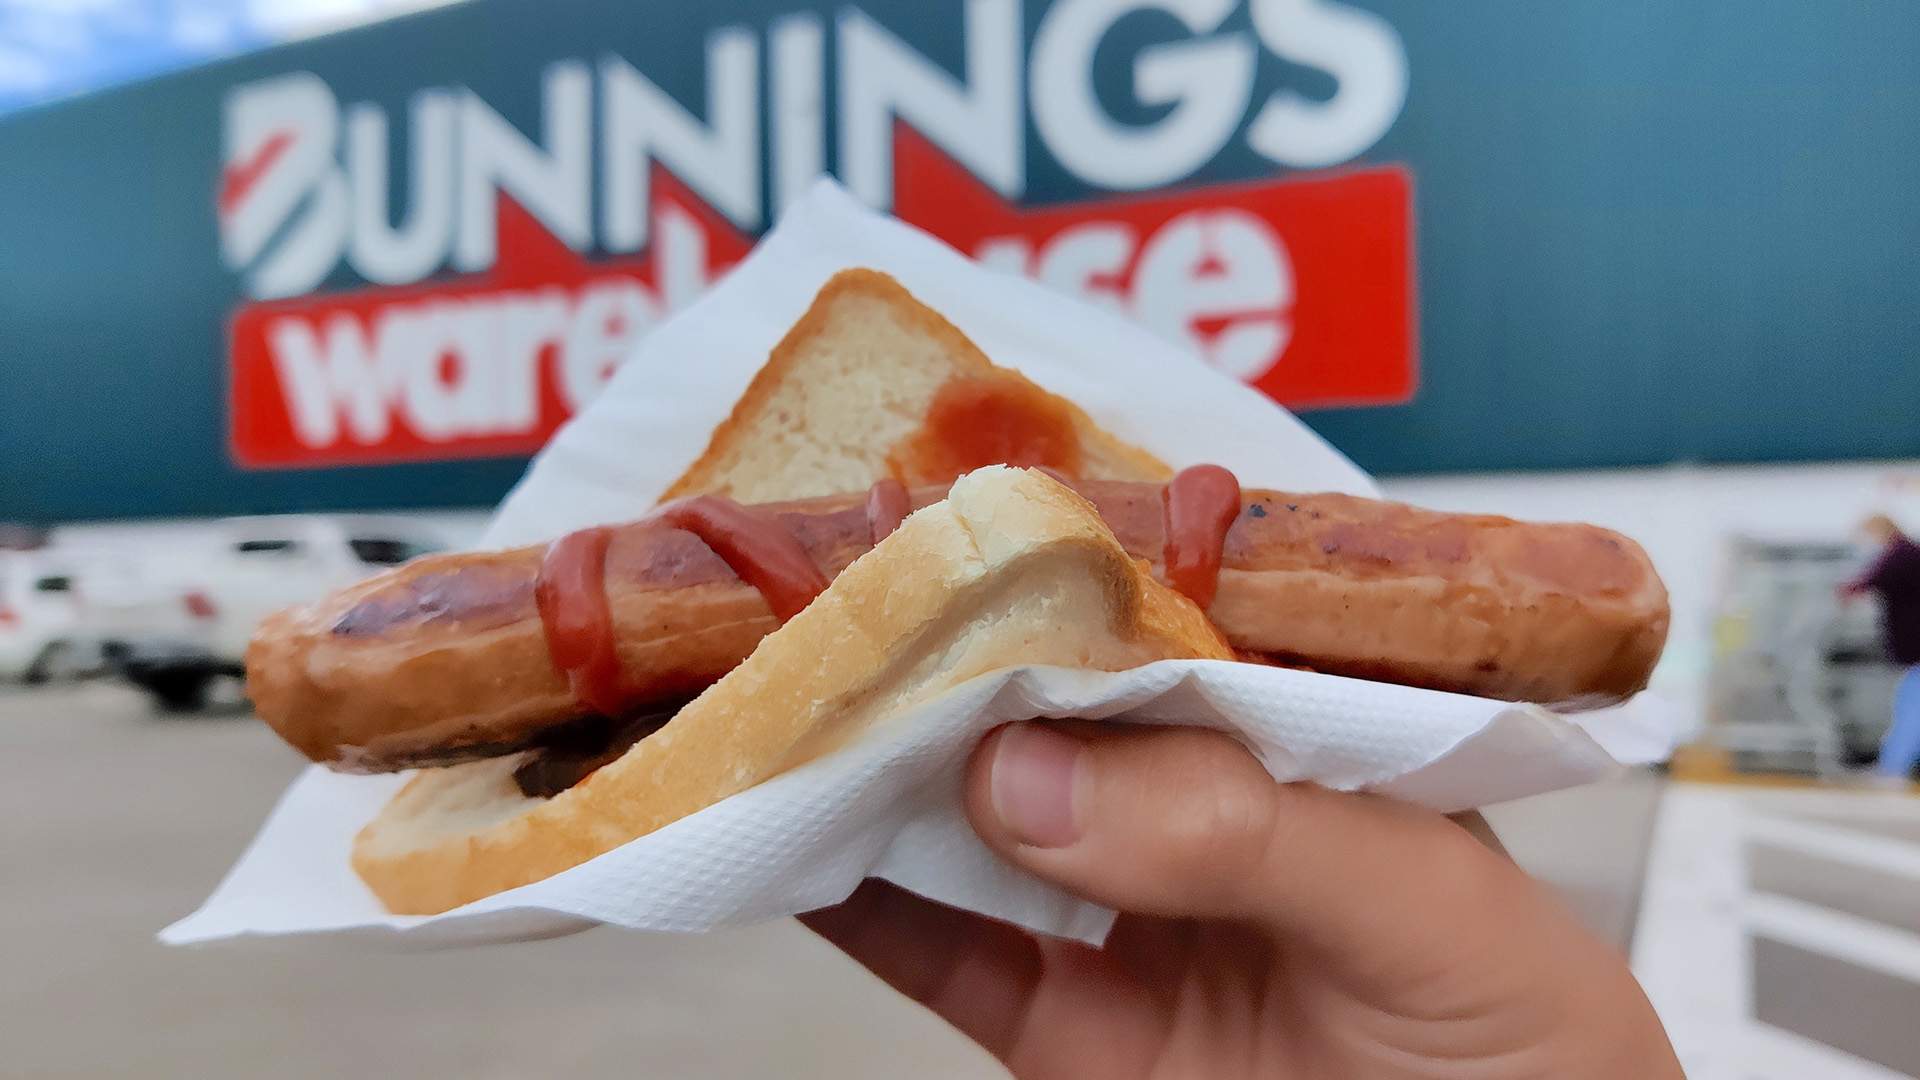 Bunnings Is Increasing the Price of Its Sausage Sizzles for the First Time in 15 Years